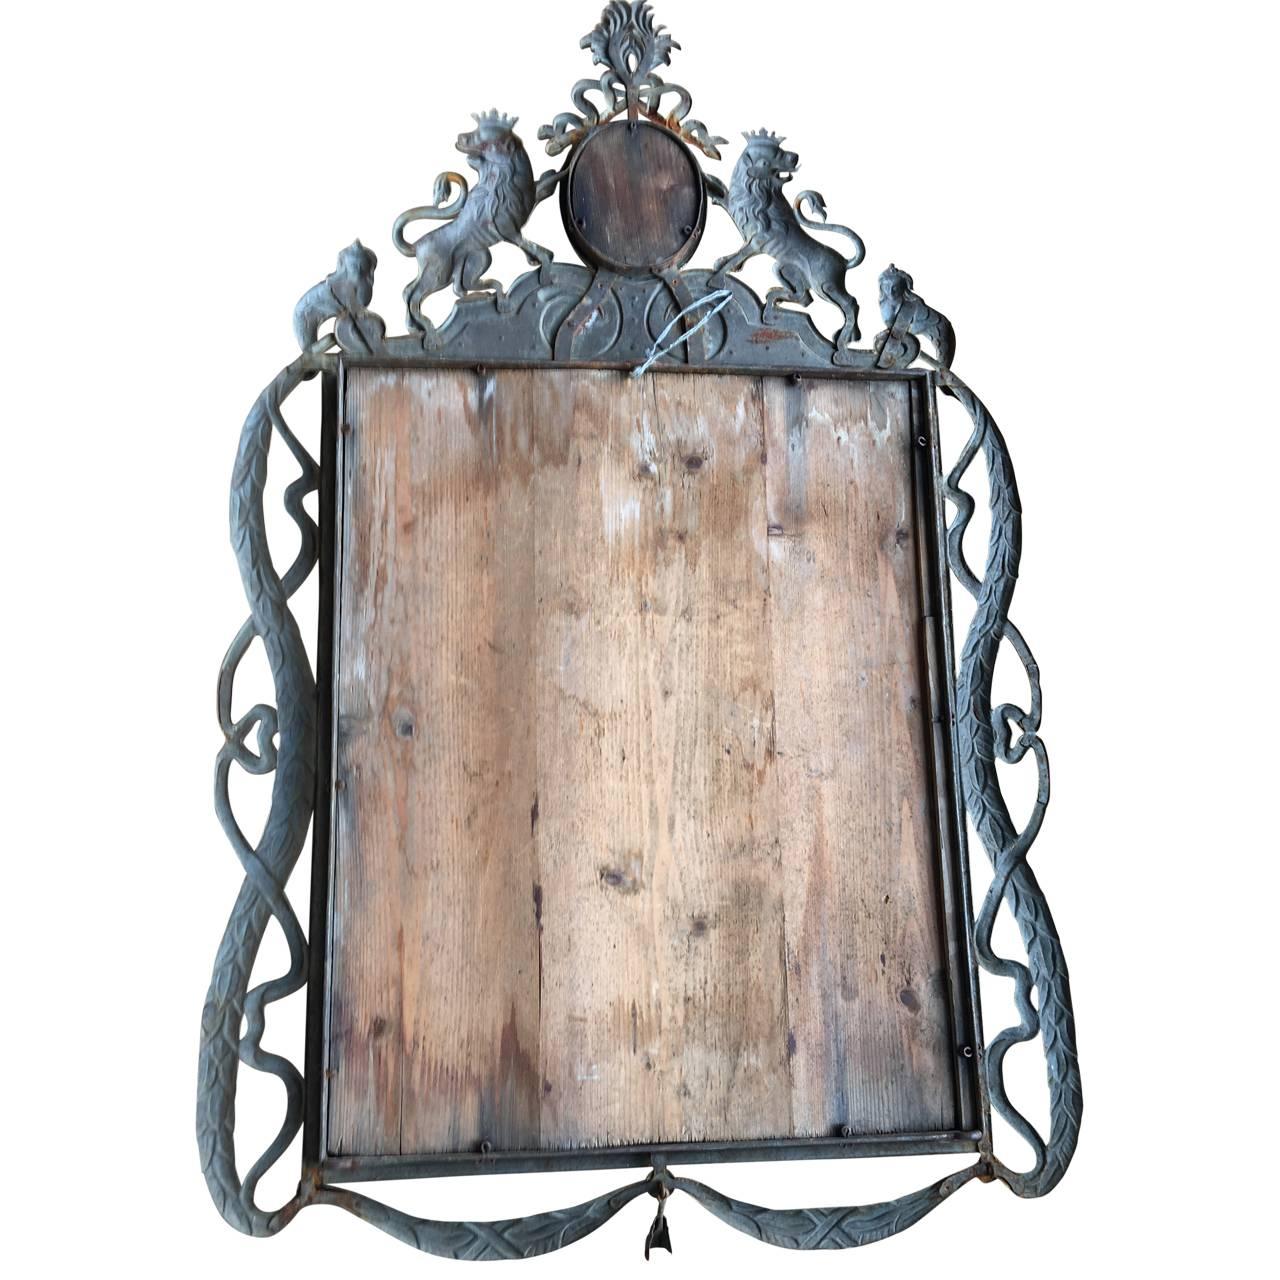 French Late 19th Century White Painted Cast Iron Patio Wall Mirror With Monogrammed Crest

$125 flat rate front door delivery includes most areas of Washington DC metro, Baltimore, Philadelphia, New Jersey, New York and Connecticut.